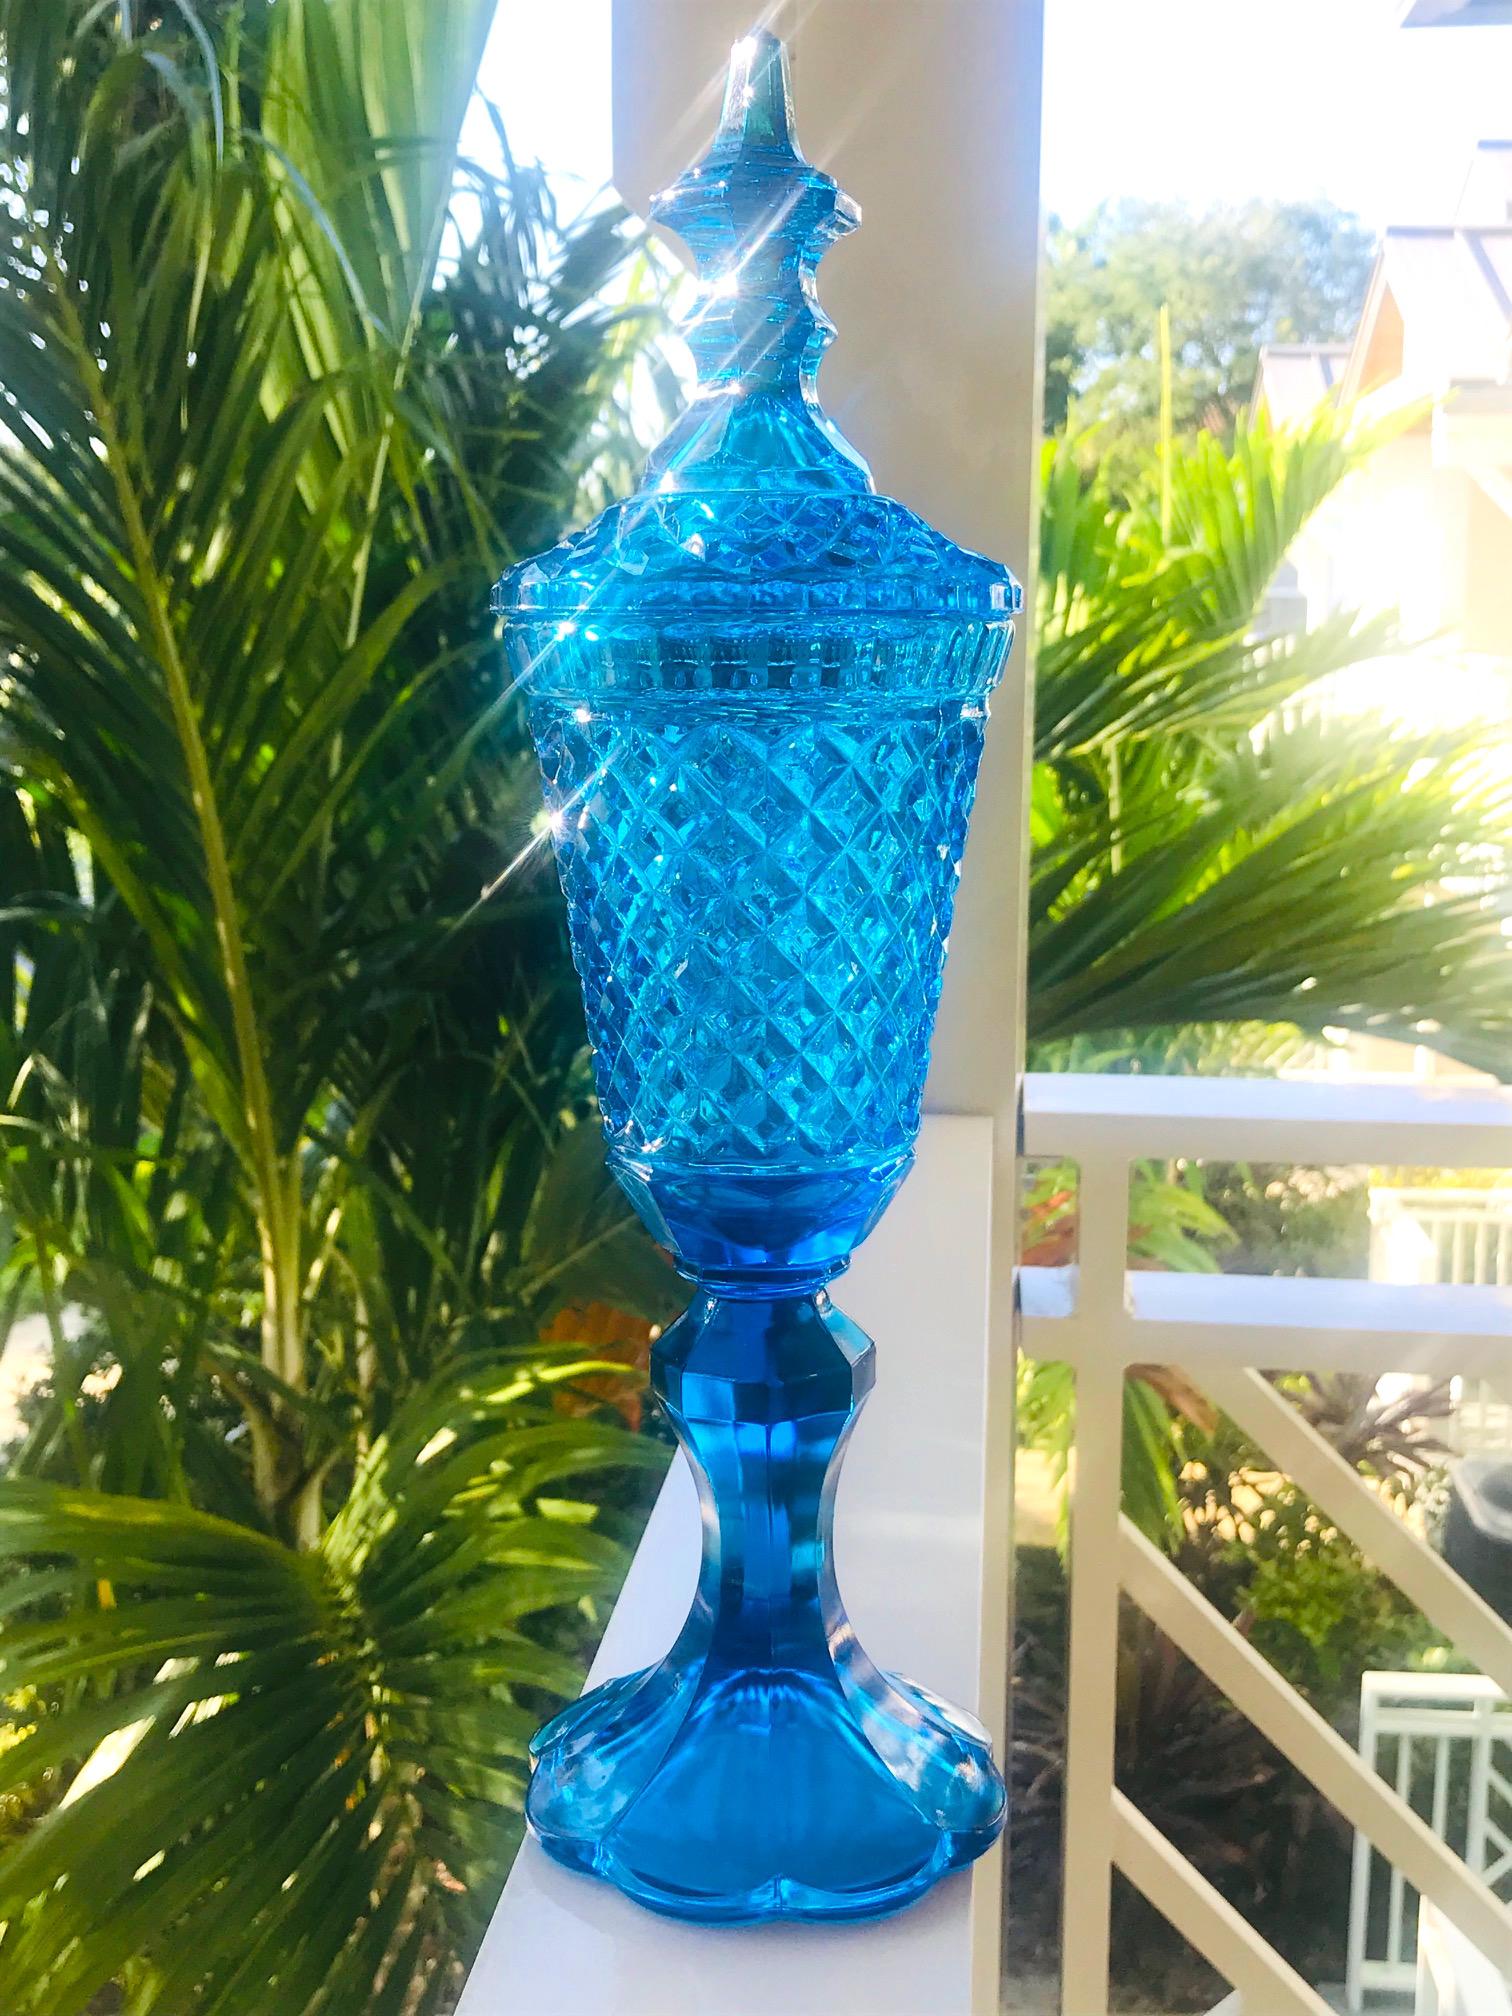 Mid-Century Modern footed glass apothecary jar or urn with stylized lid. In gorgeous hues of aqua or turquoise, this chic vase features faceted glass edges with diamond cut spikes throughout, and with a curved fluted base. Great alternative to a